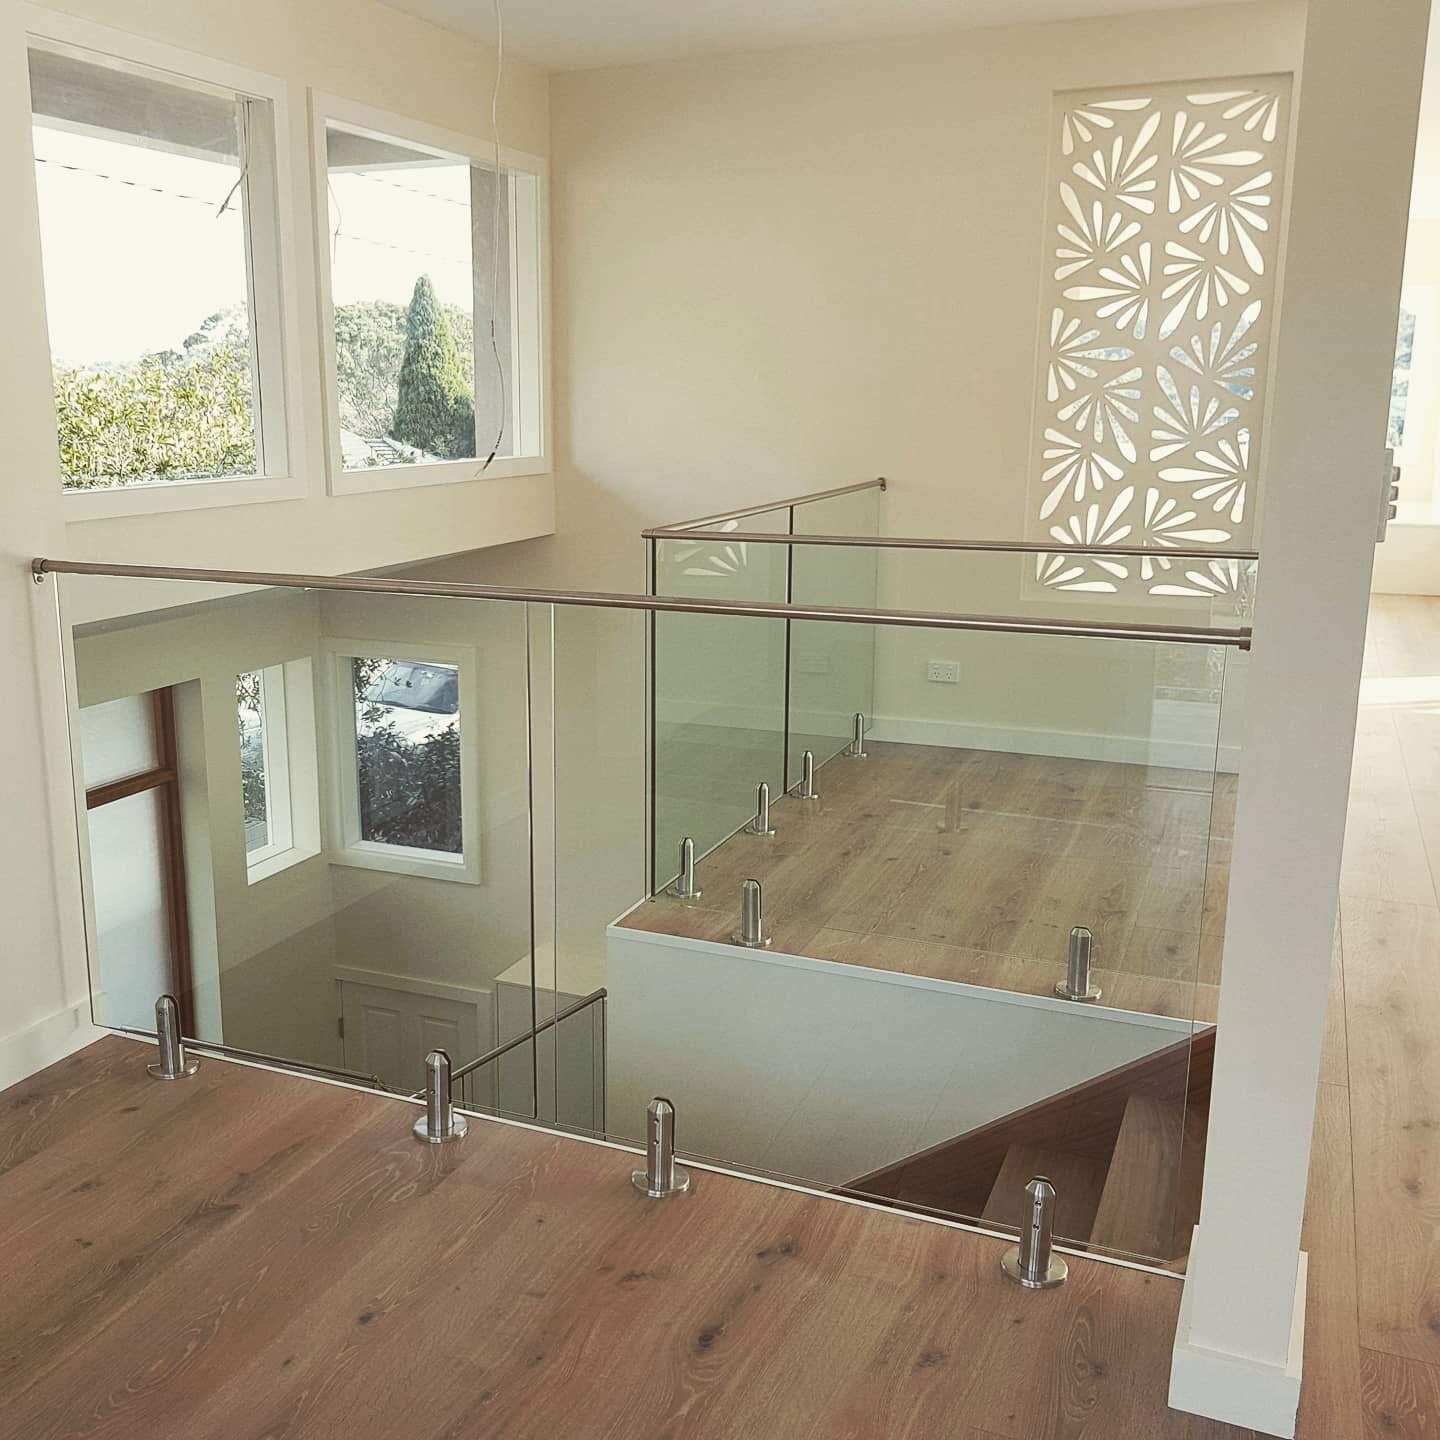 Frameless glass balustrading is a great way to create a modern open feel in any area